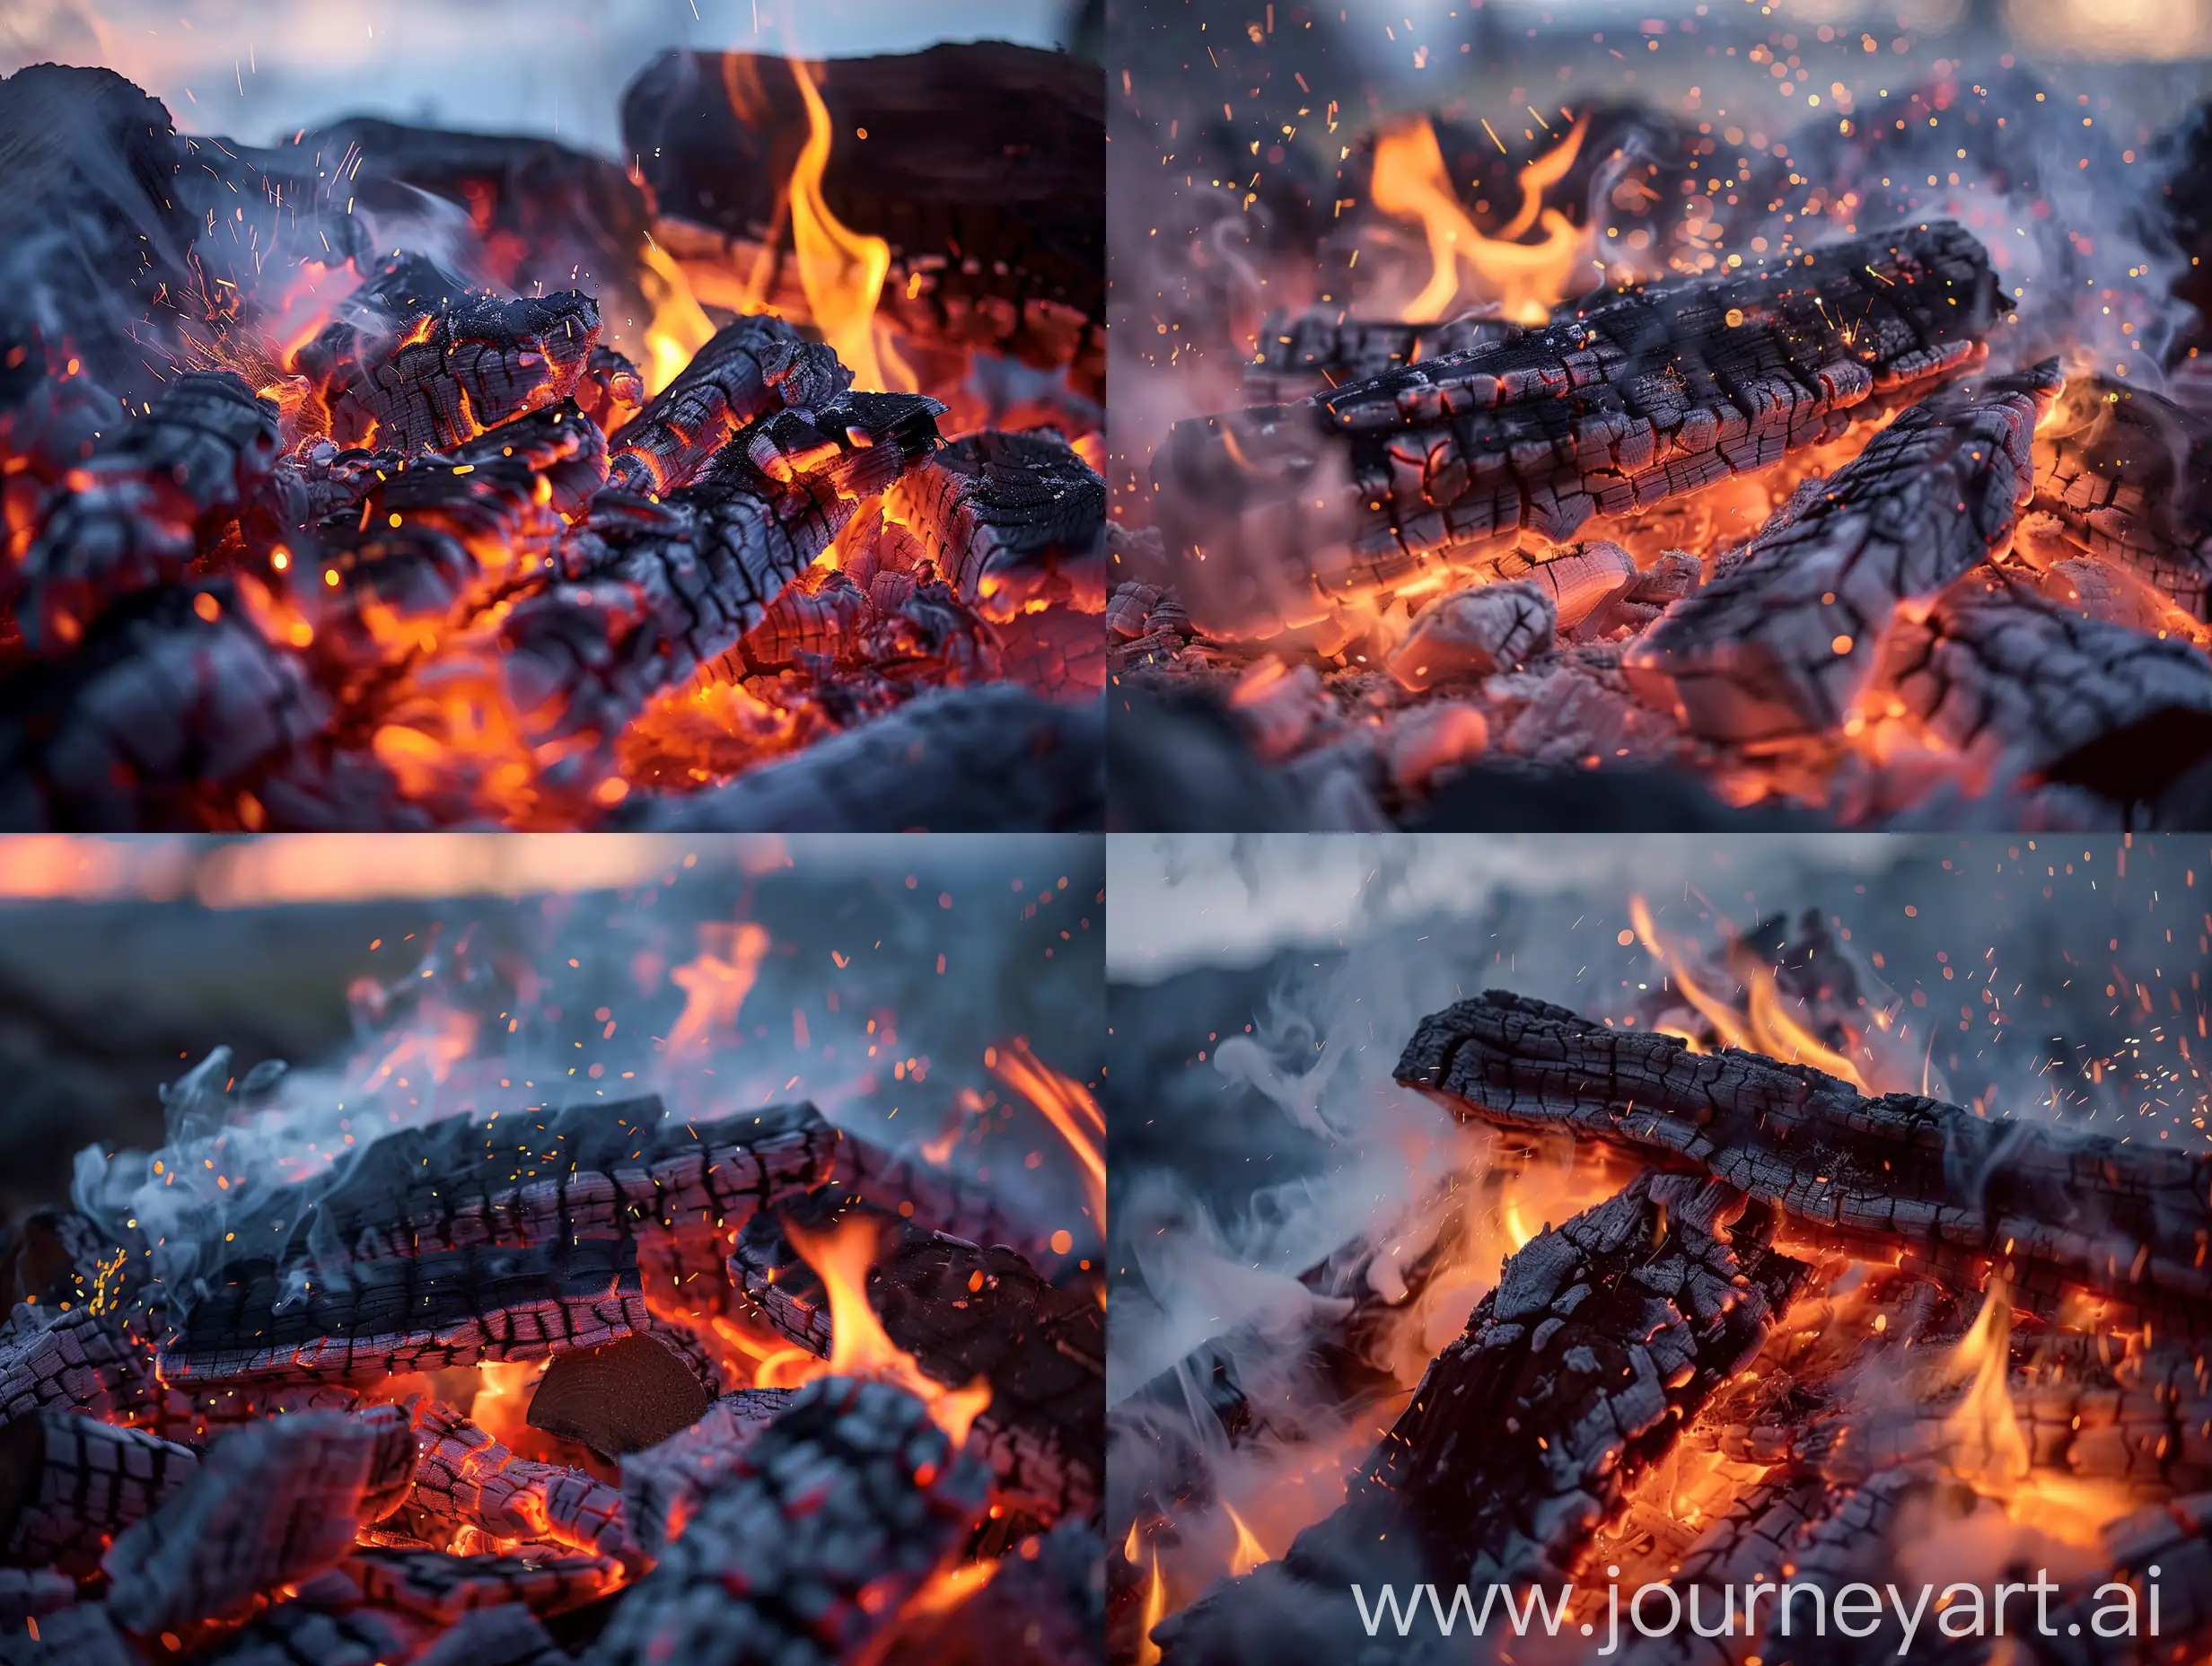 Closeup-Bonfire-with-Glowing-Coals-and-Sparks-at-Dusk